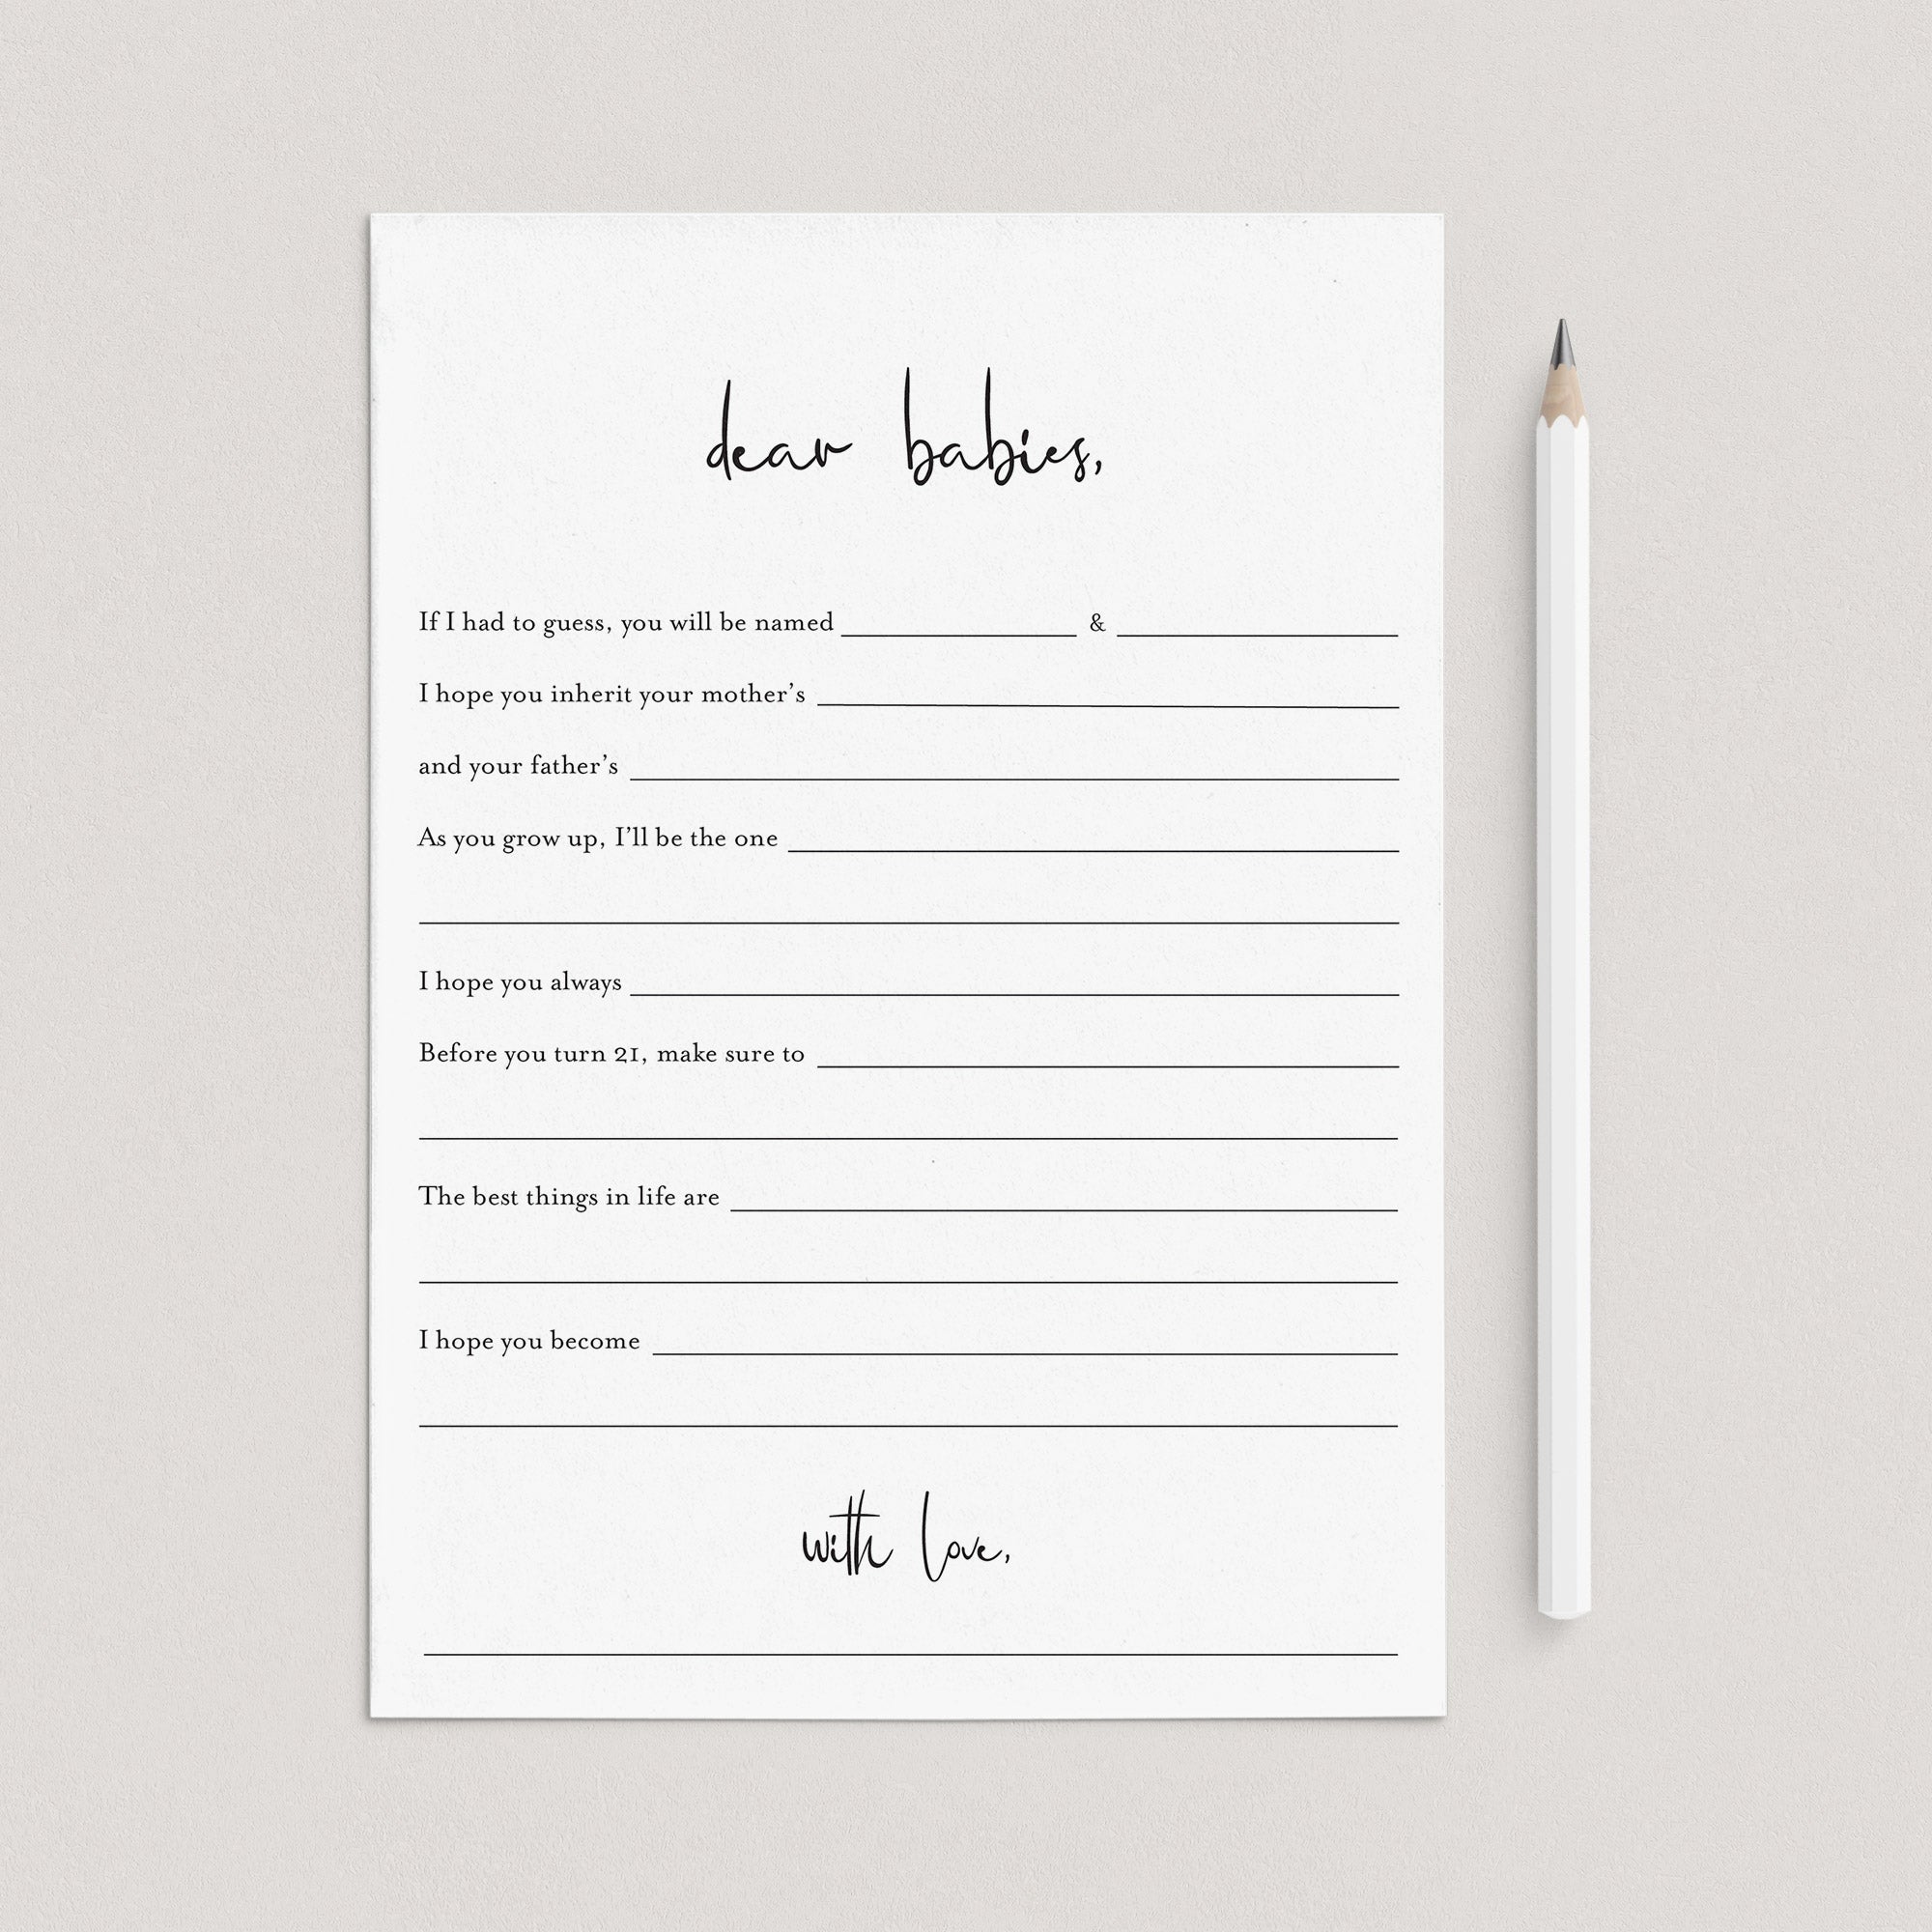 Twins Baby Shower Game Printable Dear Babies Modern Minimalist by LittleSizzle